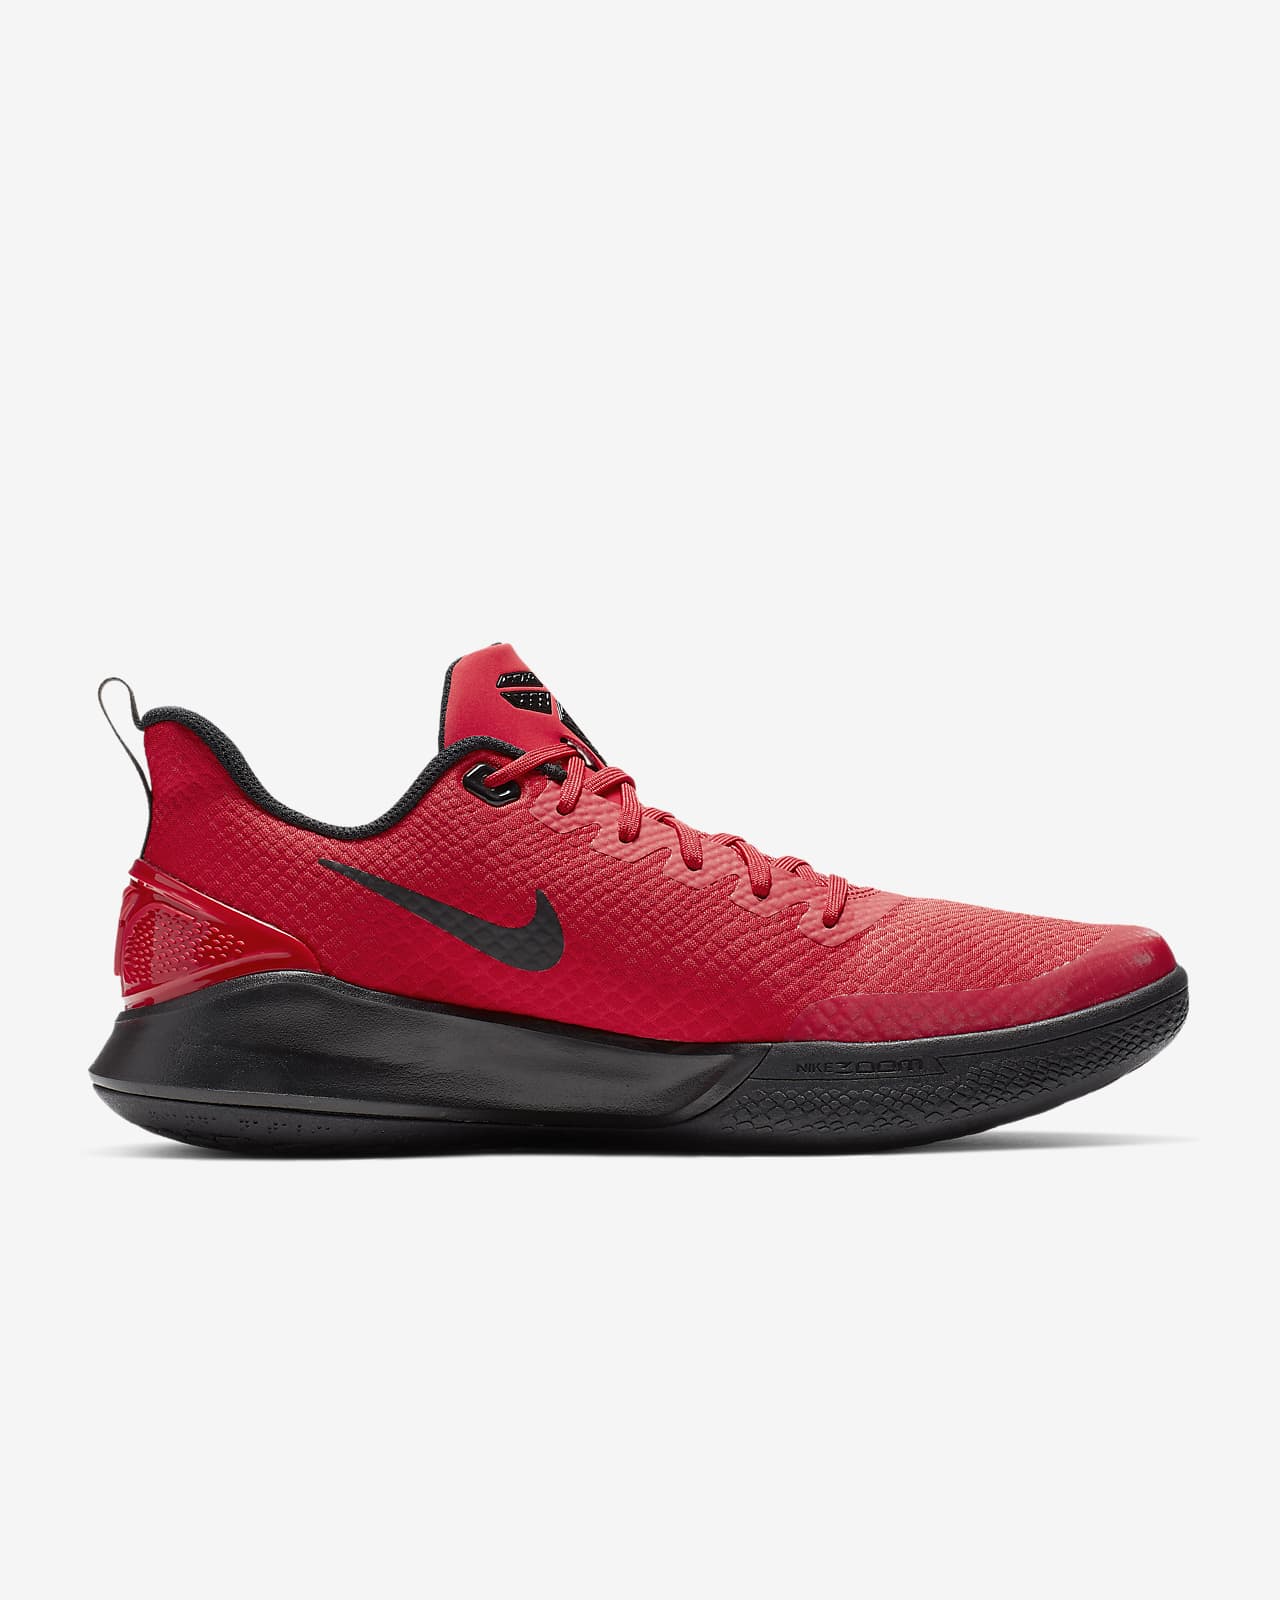 nike kobe shoes for sale philippines